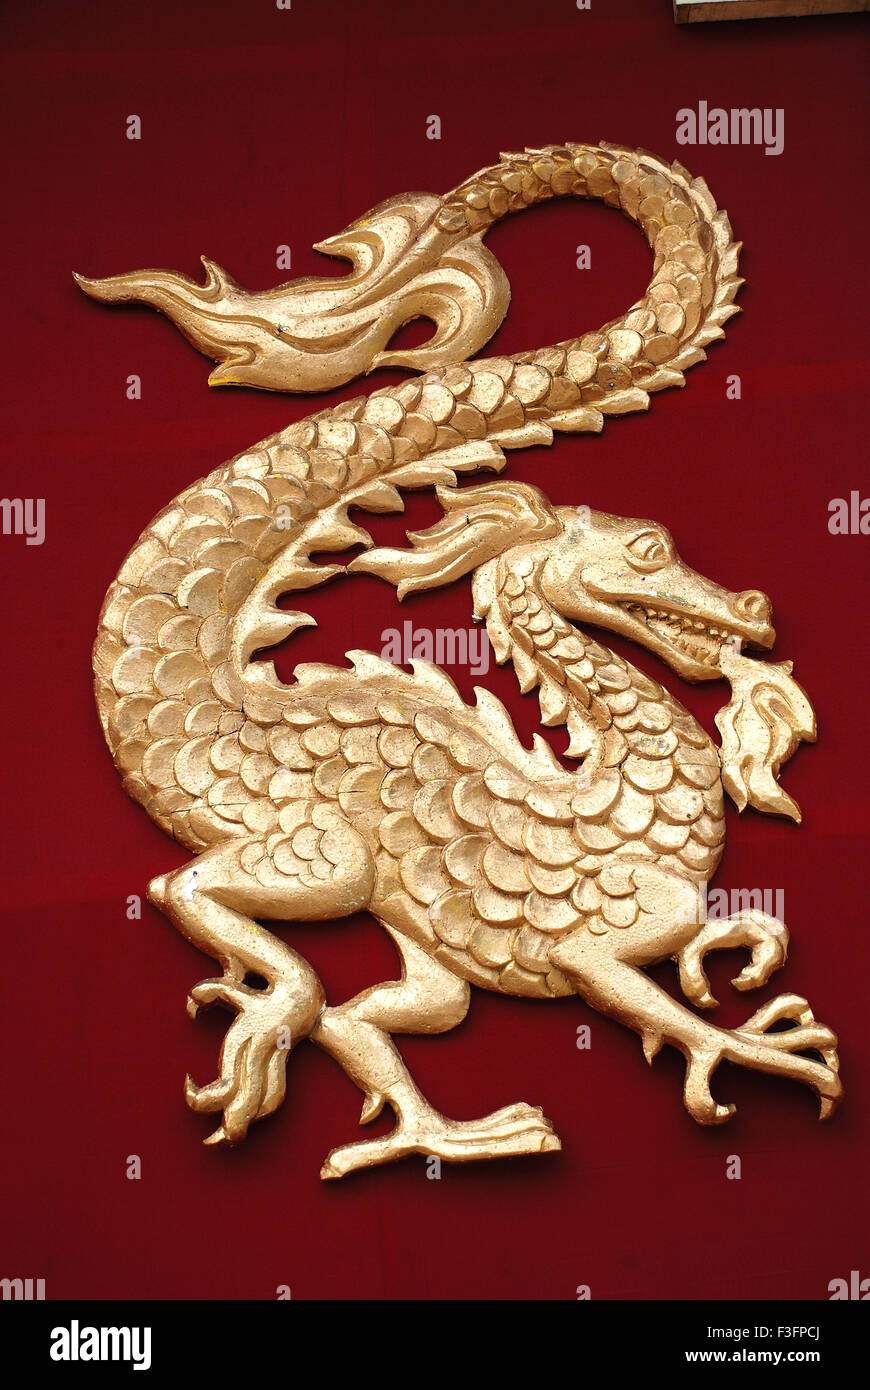 Chinese dragon, Loong, Long, Lung, legendary creature, Chinese mythology, Chinese folklore, Chinese culture, Stock Photo